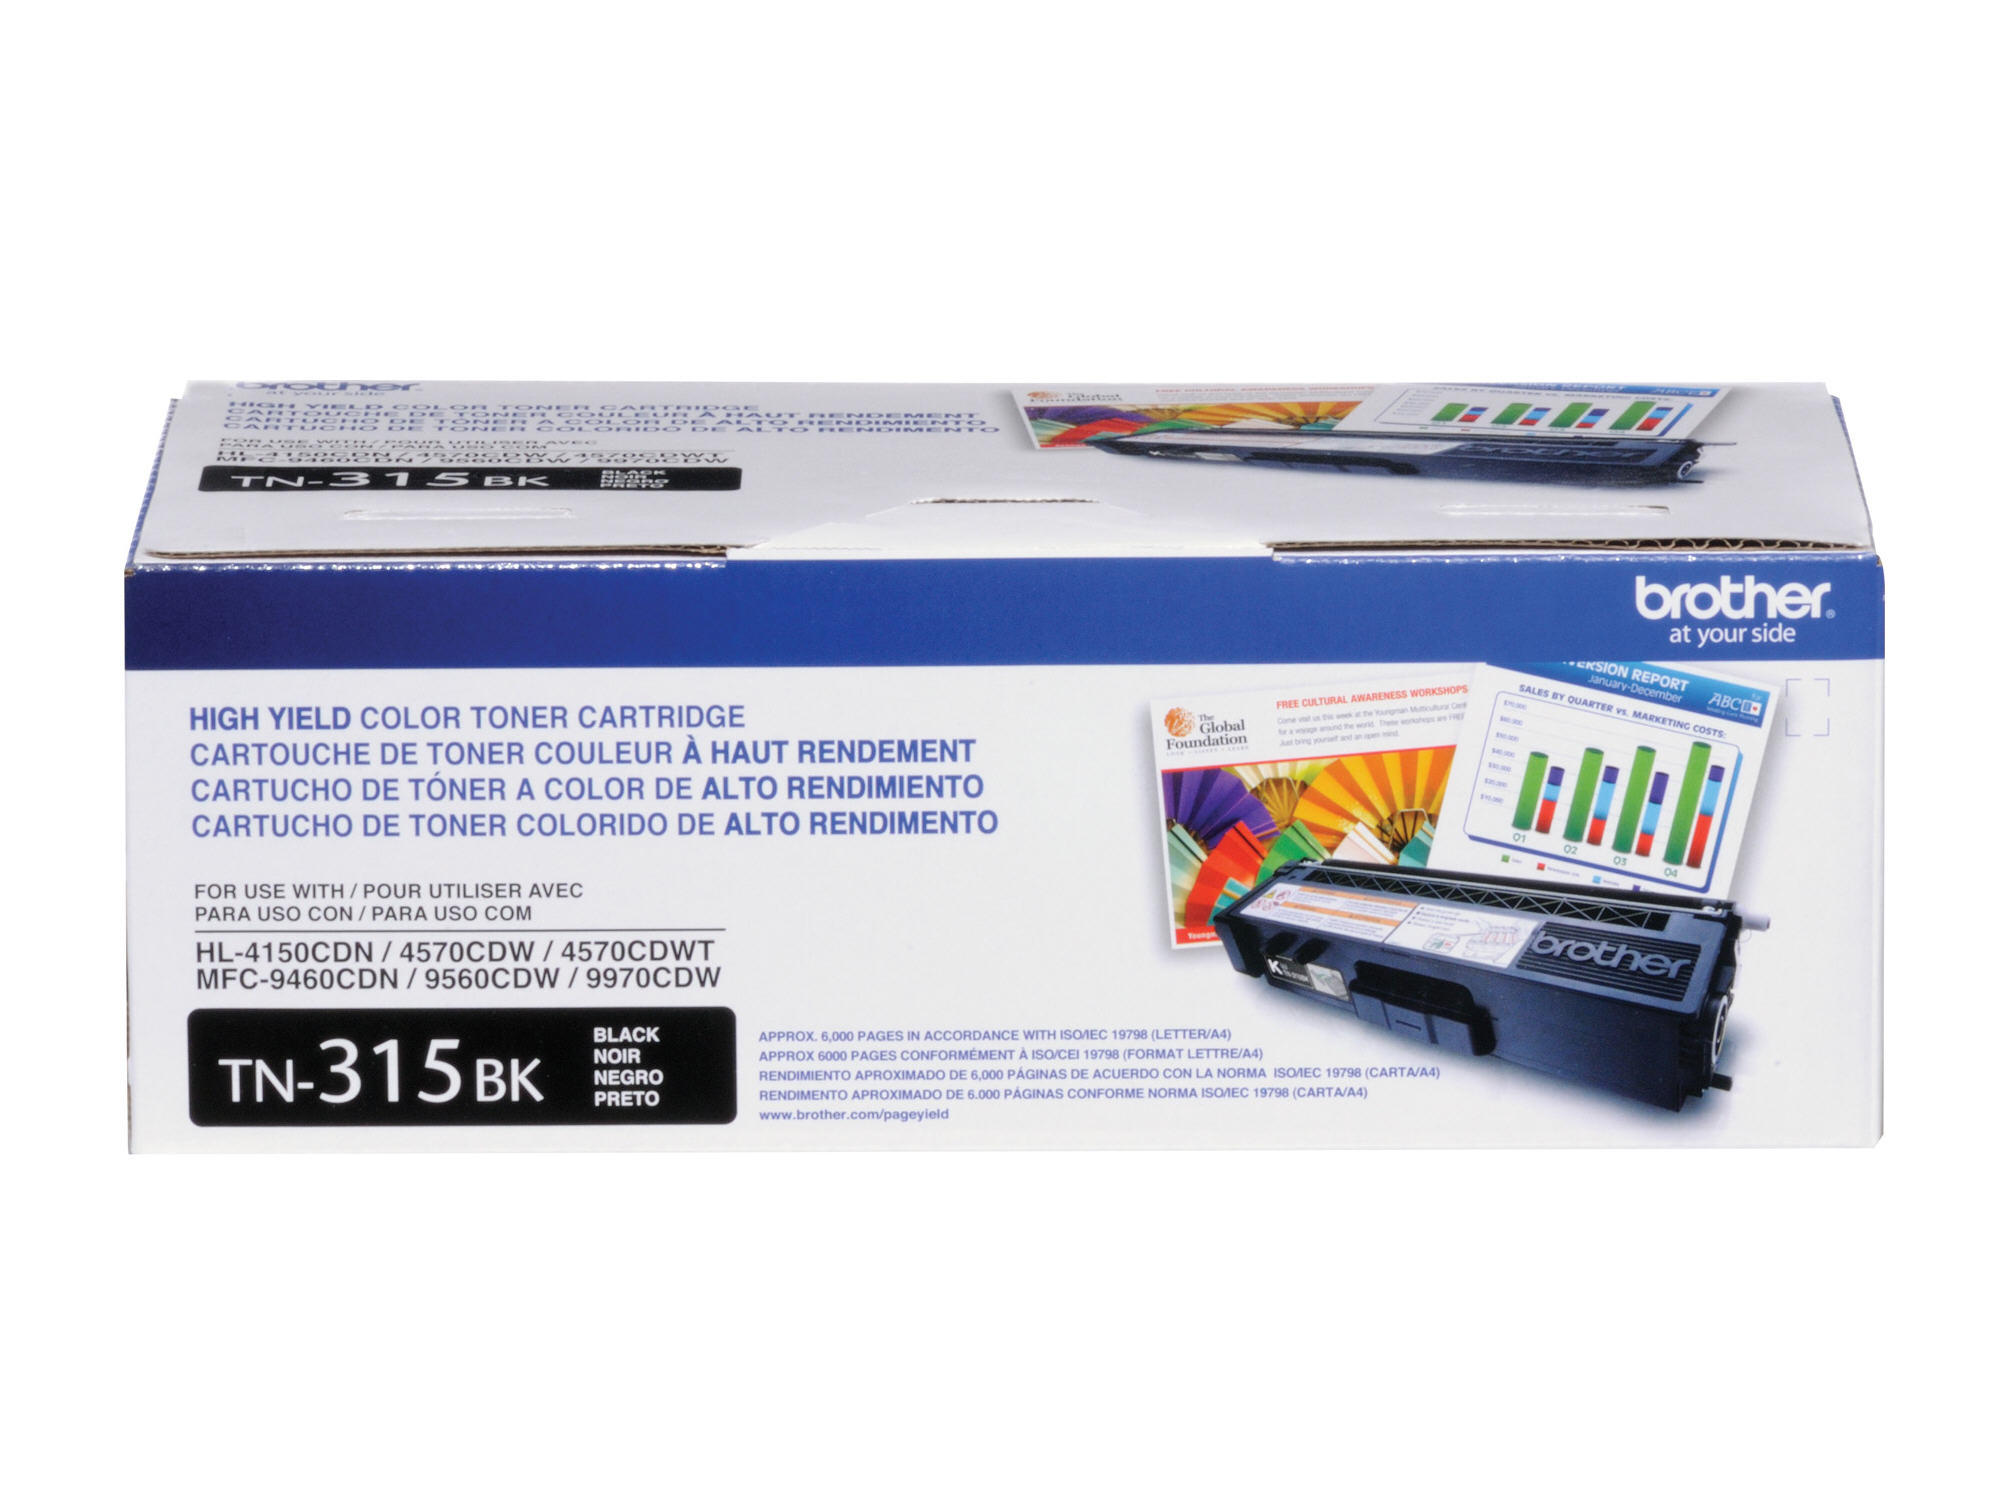 TN315BK HIGH YIELD TONER CART BLACK High Yield Black Toner Cartridge (yields approx. 6,000 pages in accordance withISO/IEC 19798 on letter/A4 size paper) BLACK HIGH YIELD TONER FOR HL4150CDN HL4570CDW HL4570CDWT<br />BLACK HIGH YIELD TONER FOR MULTI 4 HL4150CDN HL4570CDW